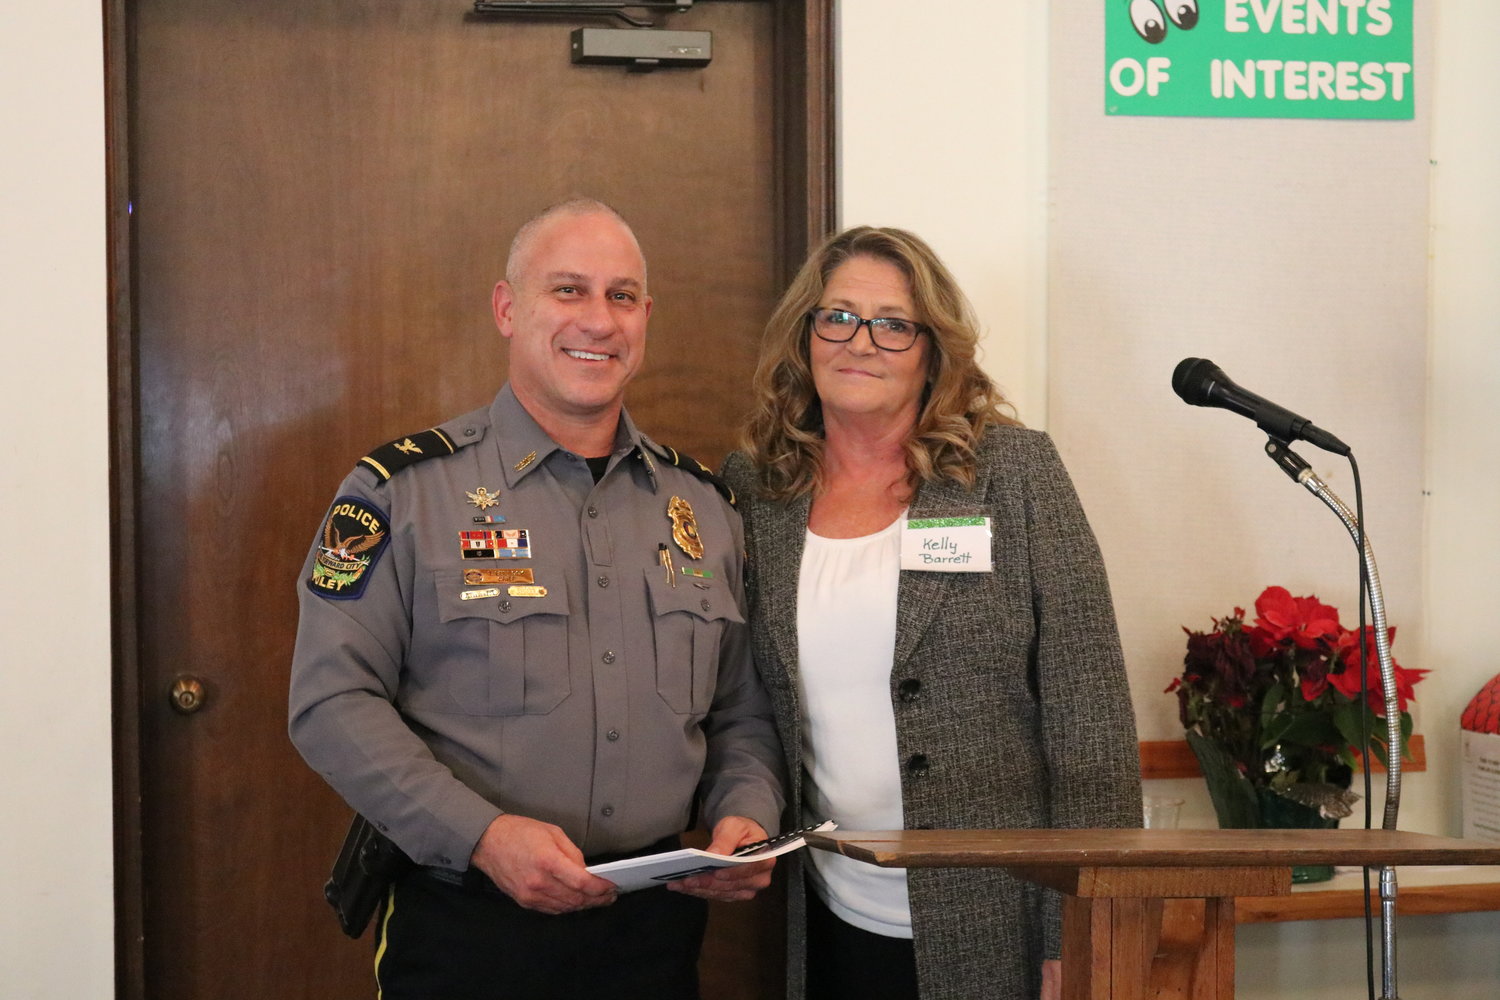 Foley Police Chief Thurston Bullock receives a gift from the club members, presented by Club President Kelly Barrett.